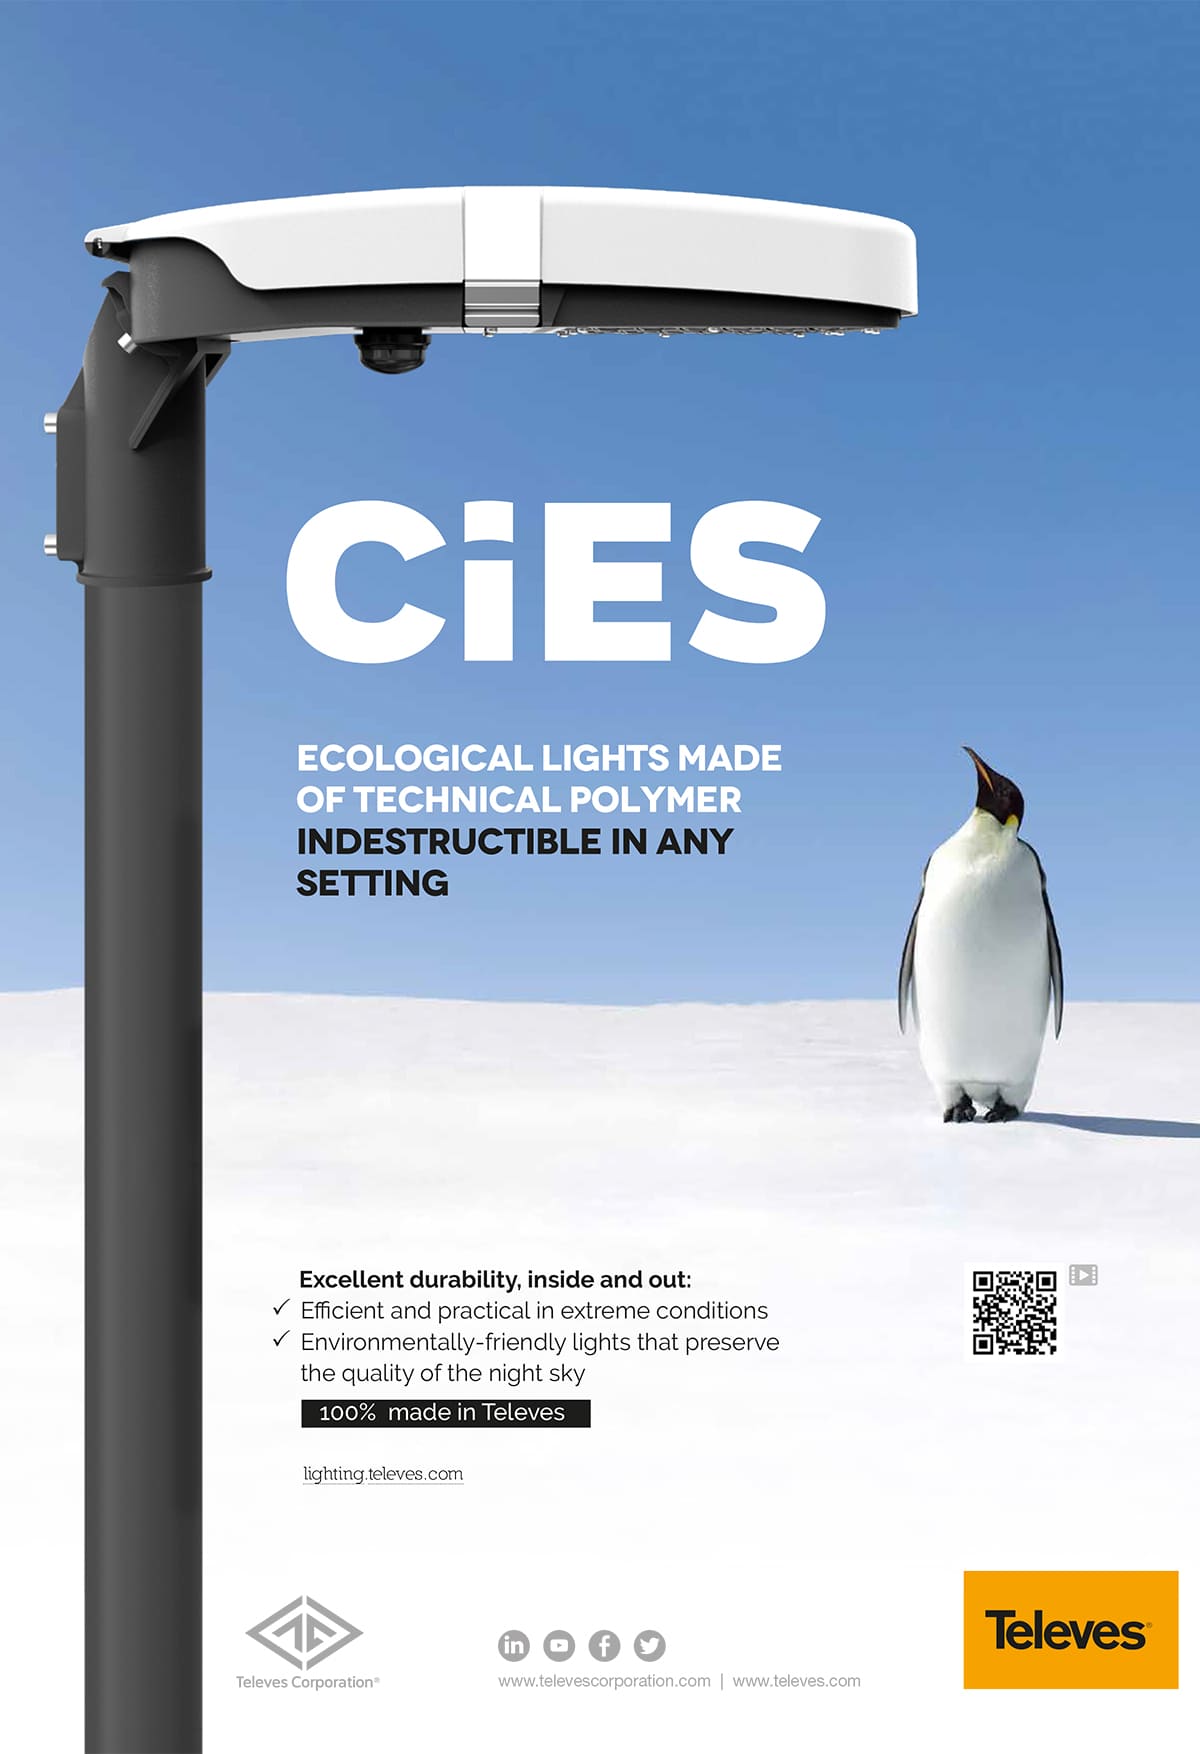 Cies. Ecological lights made of technical polymer